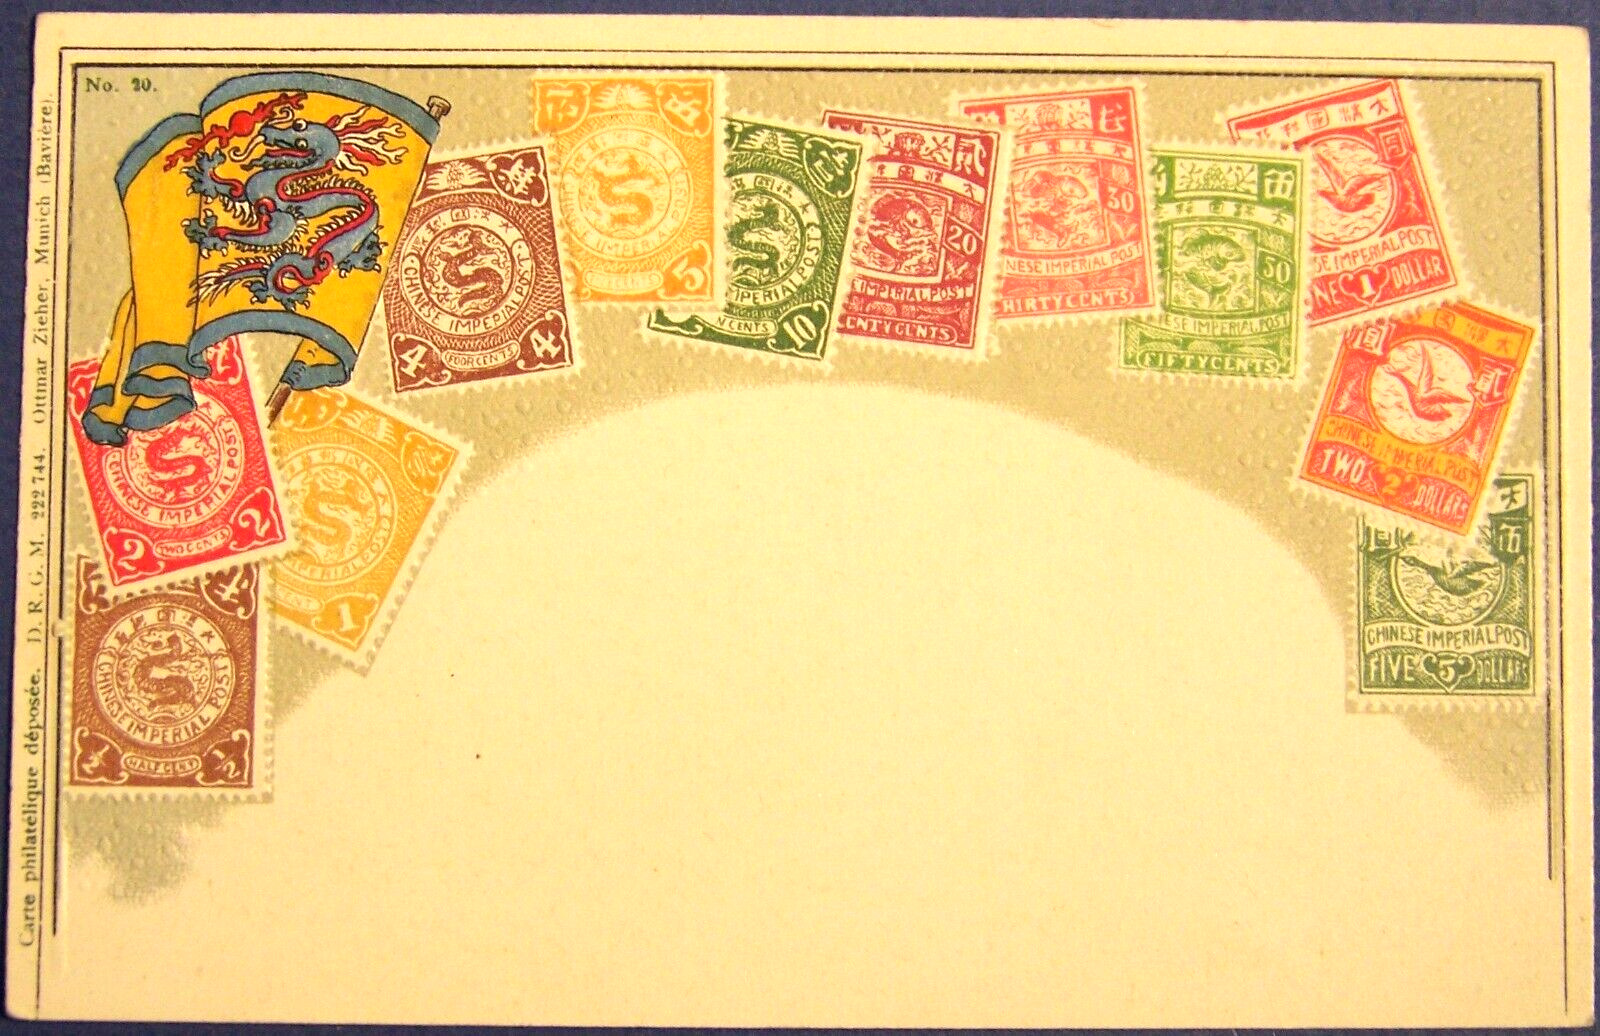 C. 1905, CHINA, EMBOSSED IMPERIAL FANTASY STAMPS On Face Of Postcard, unposted